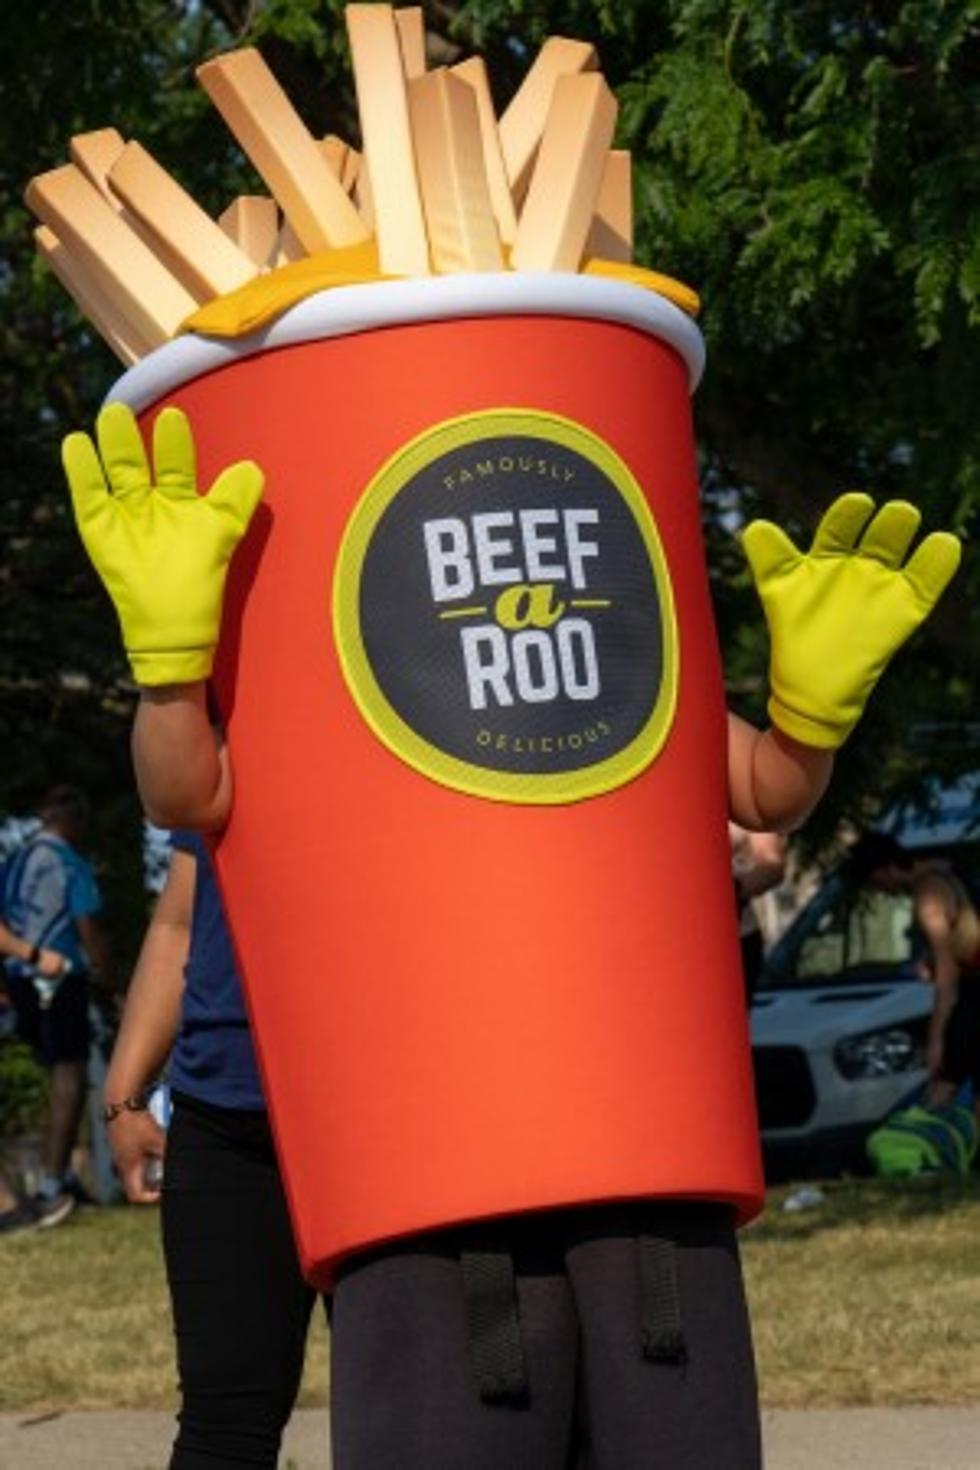 Serious IL Food Question: What Happened To Beef-A-Roo's Fries?